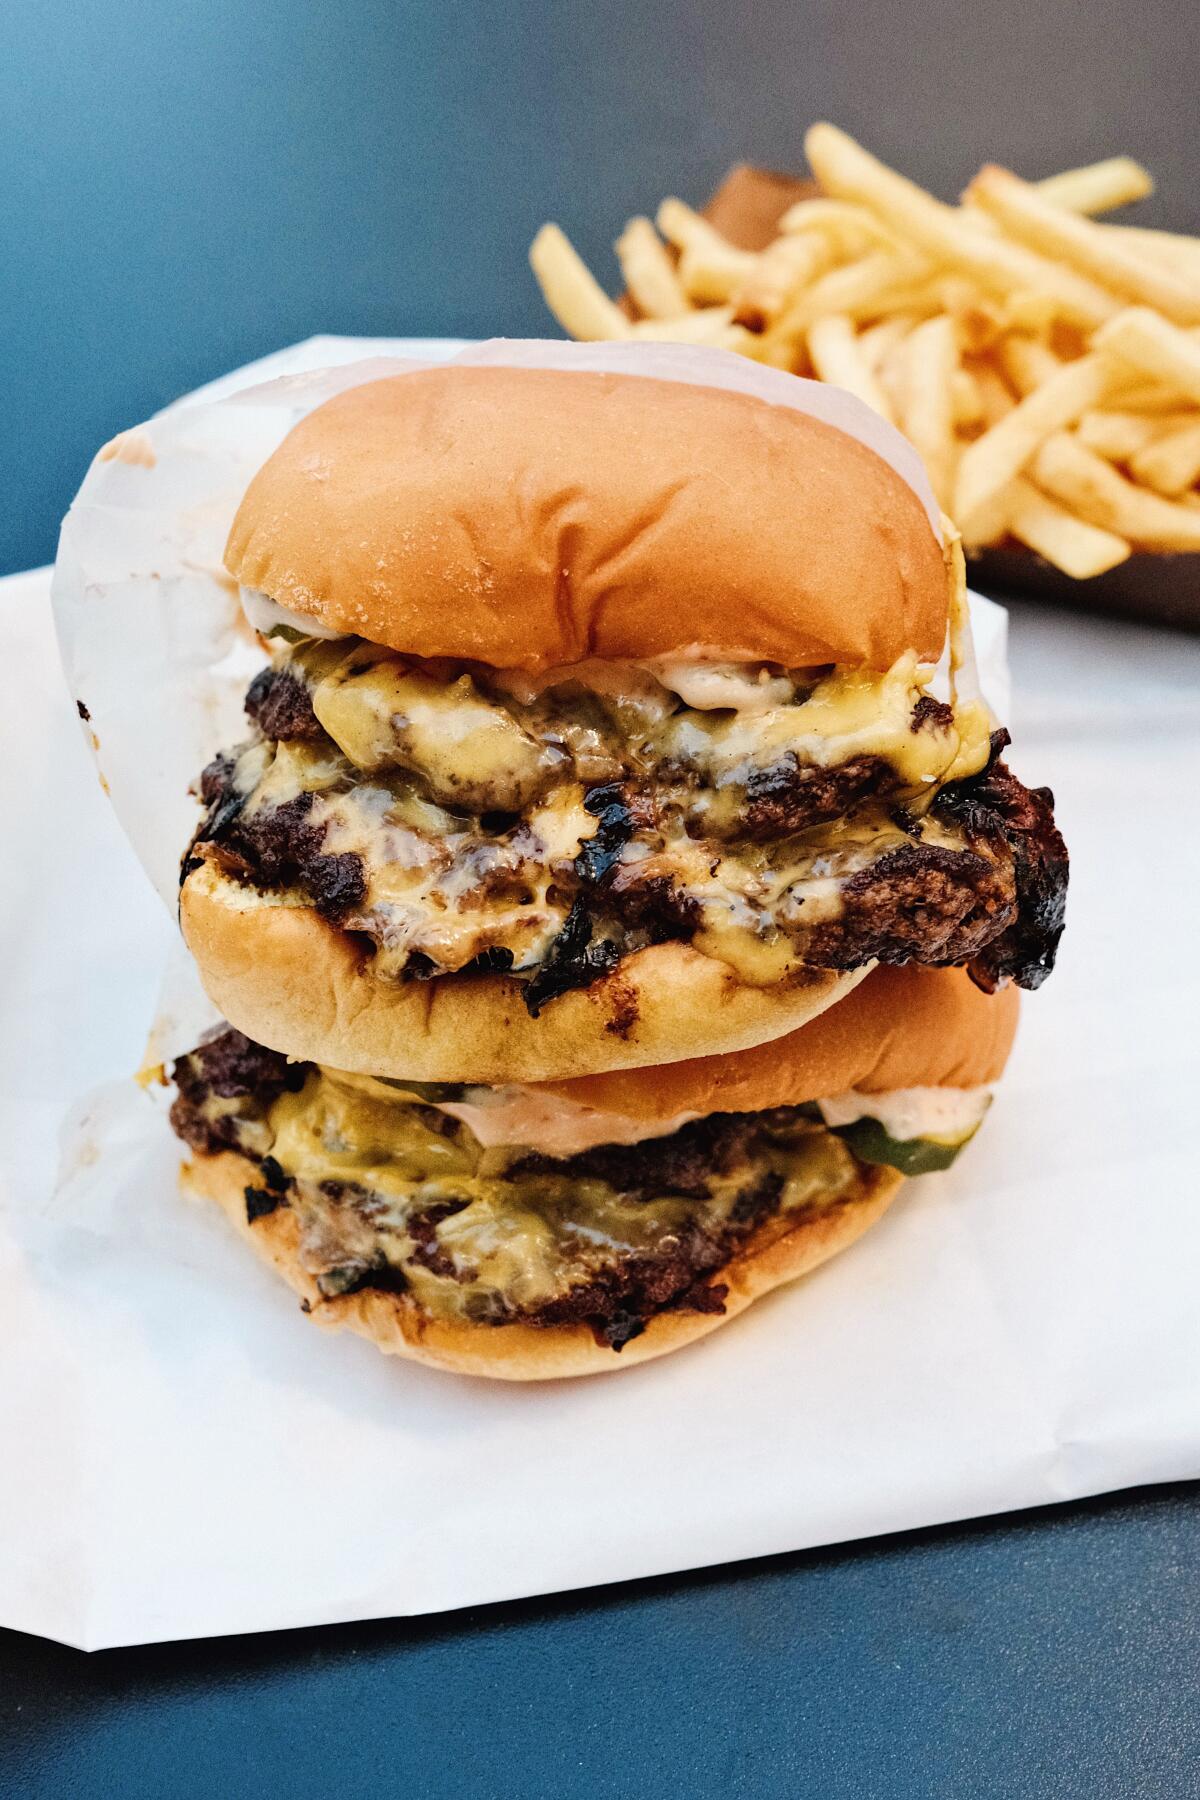 Two double cheeseburgers stacked from the Win-Dow, with fries in the background.